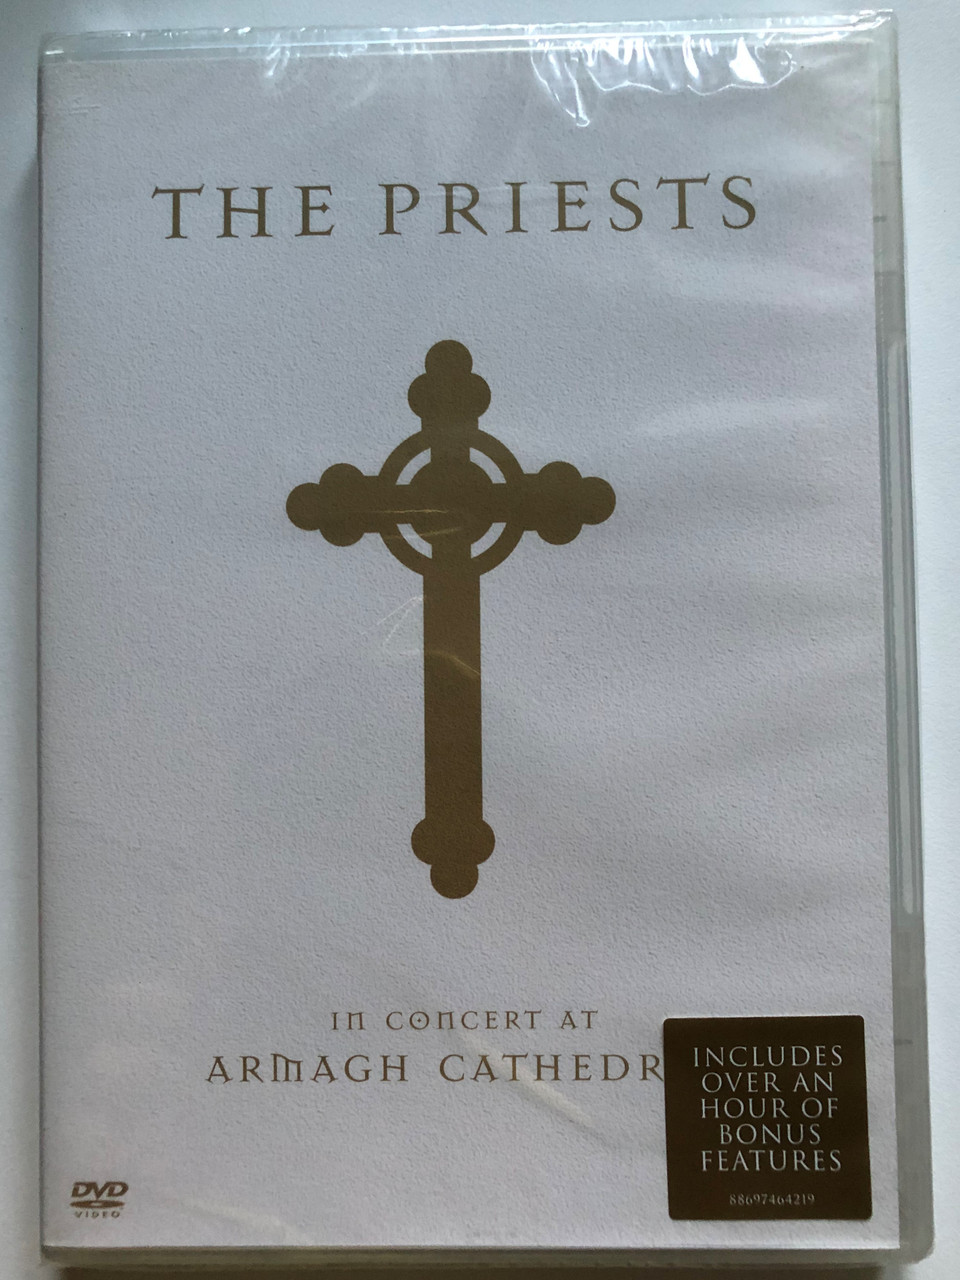 https://cdn10.bigcommerce.com/s-62bdpkt7pb/products/0/images/266213/1_In_Concert_at_Armagh_Cathedral_Actors_The_Priests_Director_Chris_Cowey_DVD_886974642190_1__49140.1676133357.1280.1280.JPG?c=2&_gl=1*18yuuaa*_ga*MjAyOTE0ODY1OS4xNTkyNDY2ODc5*_ga_WS2VZYPC6G*MTY3NjExODMzOS4yODIwLjEuMTY3NjEzMzIyMy42MC4wLjA.